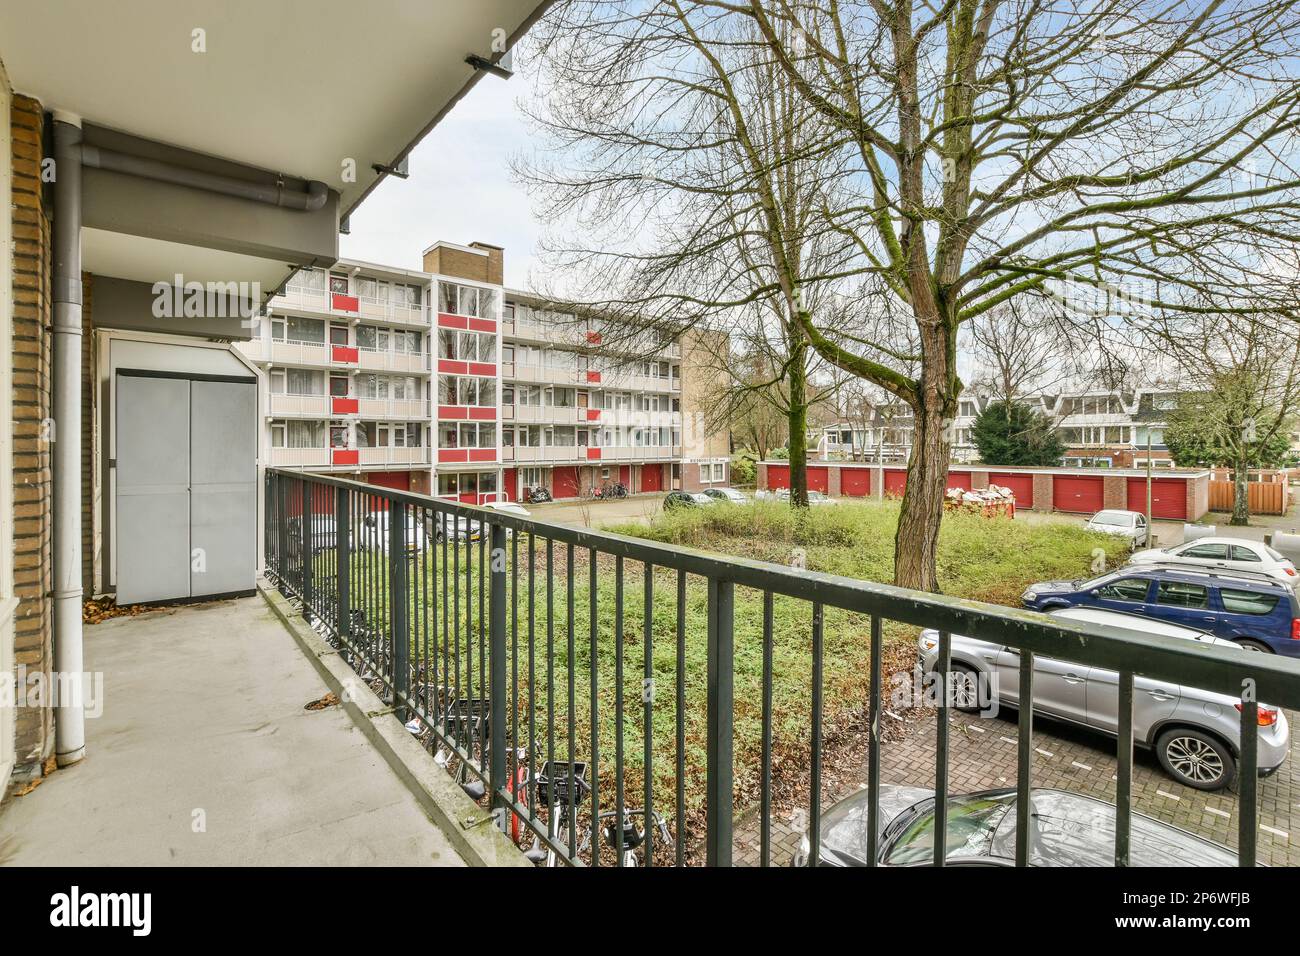 Amsterdam, Netherlands - 10 April, 2021: an outside area with cars parked in the parking lot and trees on the other side of the building, as seen from the balcony Stock Photo